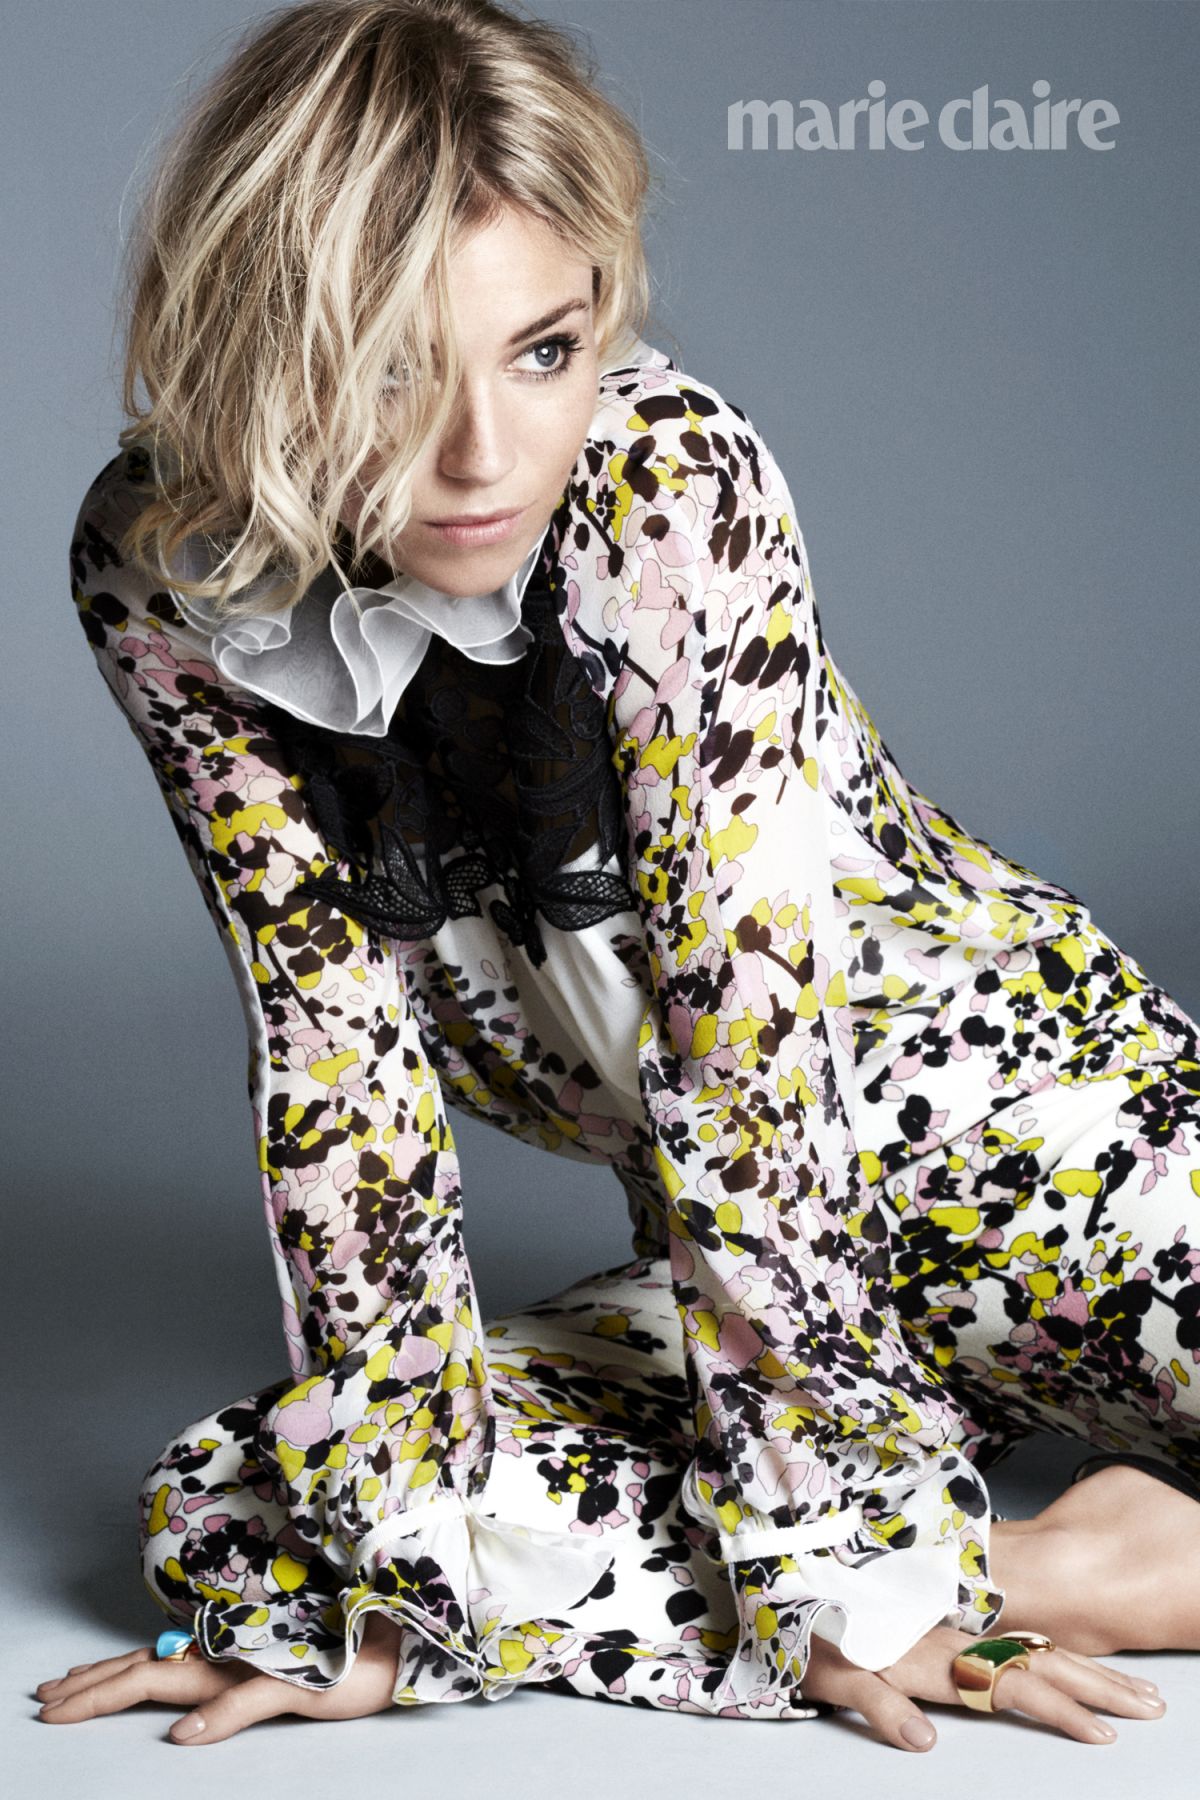 SIENNA MILLER in Marie Claire Magazine, October 2015 Issue – HawtCelebs